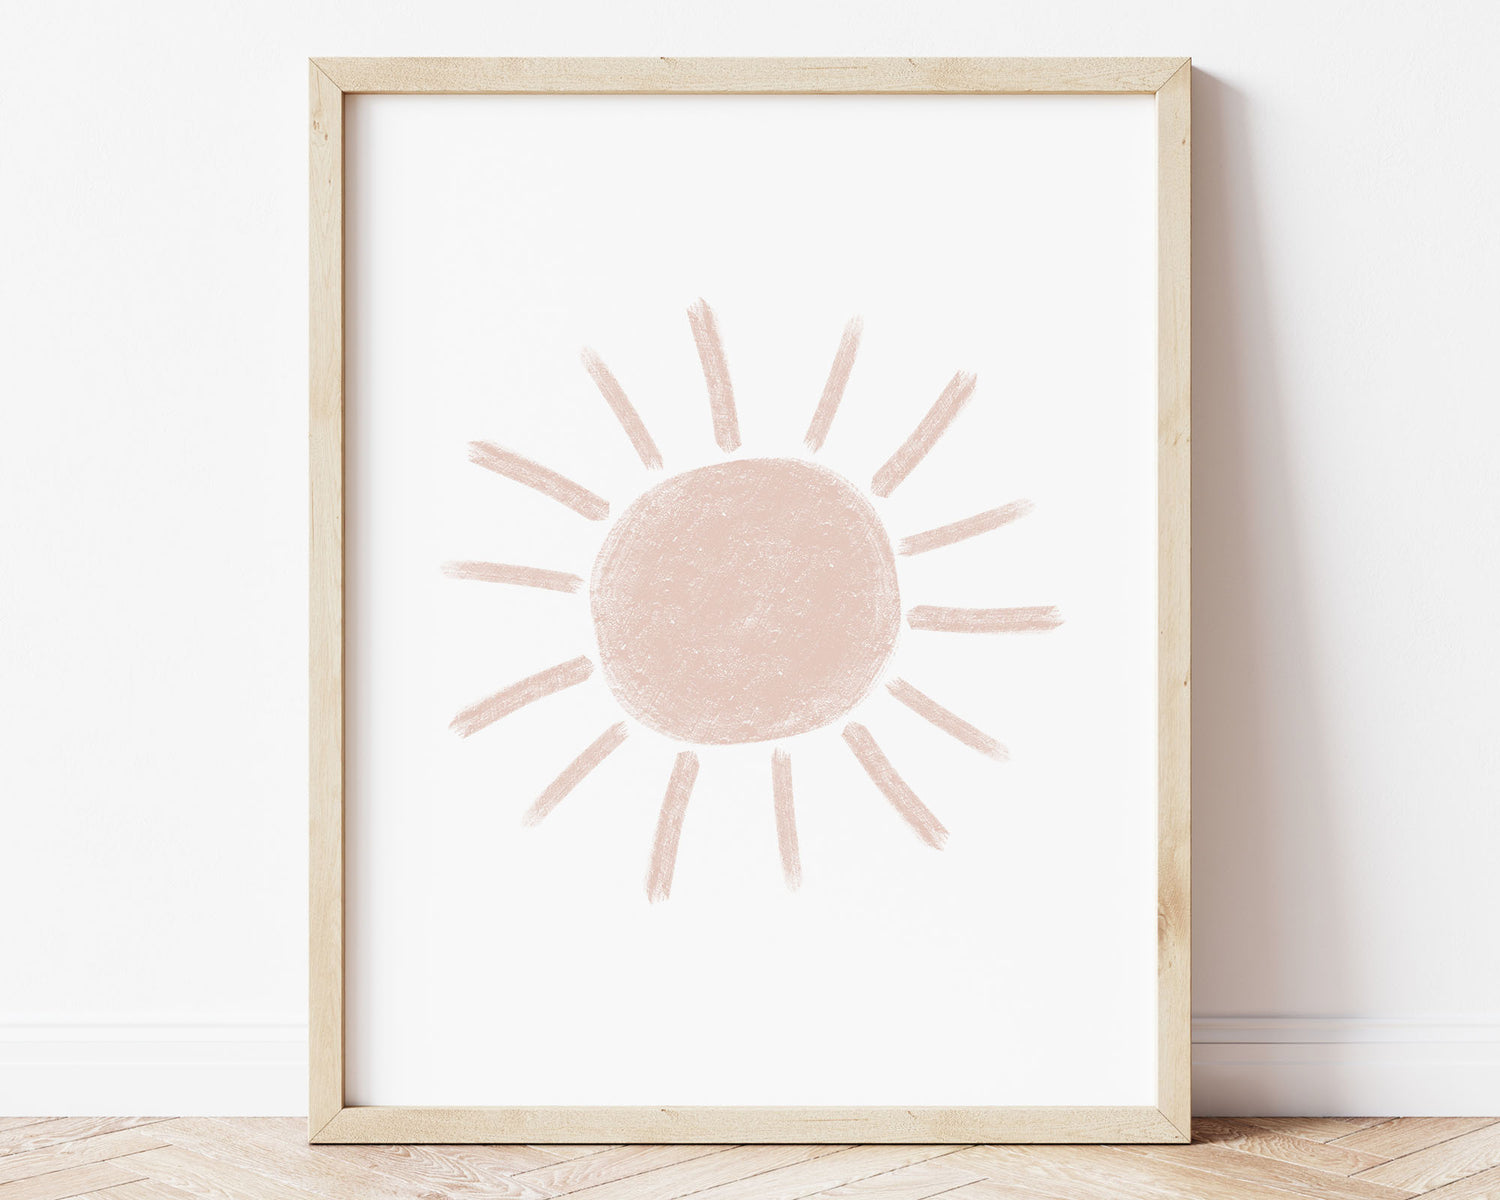 Blush pink abstract sun in chalky brushstroke illlustration style perfect for Baby Nursery Décor, Little Boys Bedroom Wall Art, Toddler Girls Room Wall Hangings, Kiddos Bathroom Wall Art and Childrens Playroom Décor.